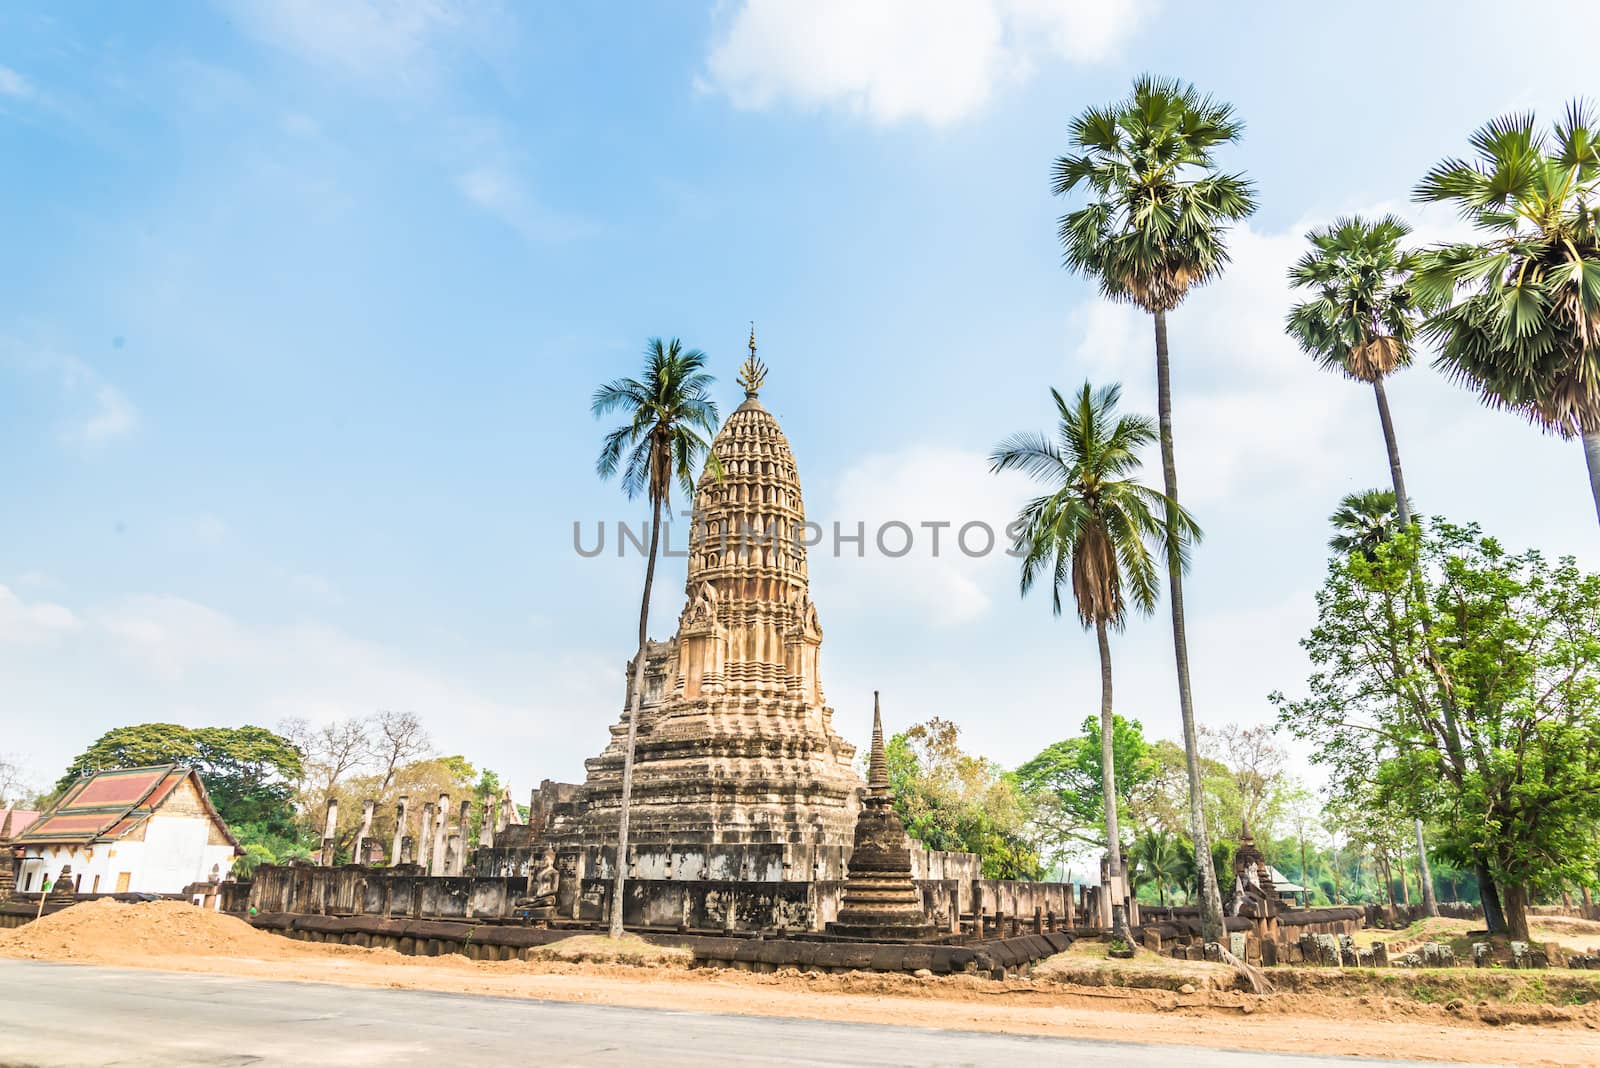 Sukhothai ruin old city country Thailand